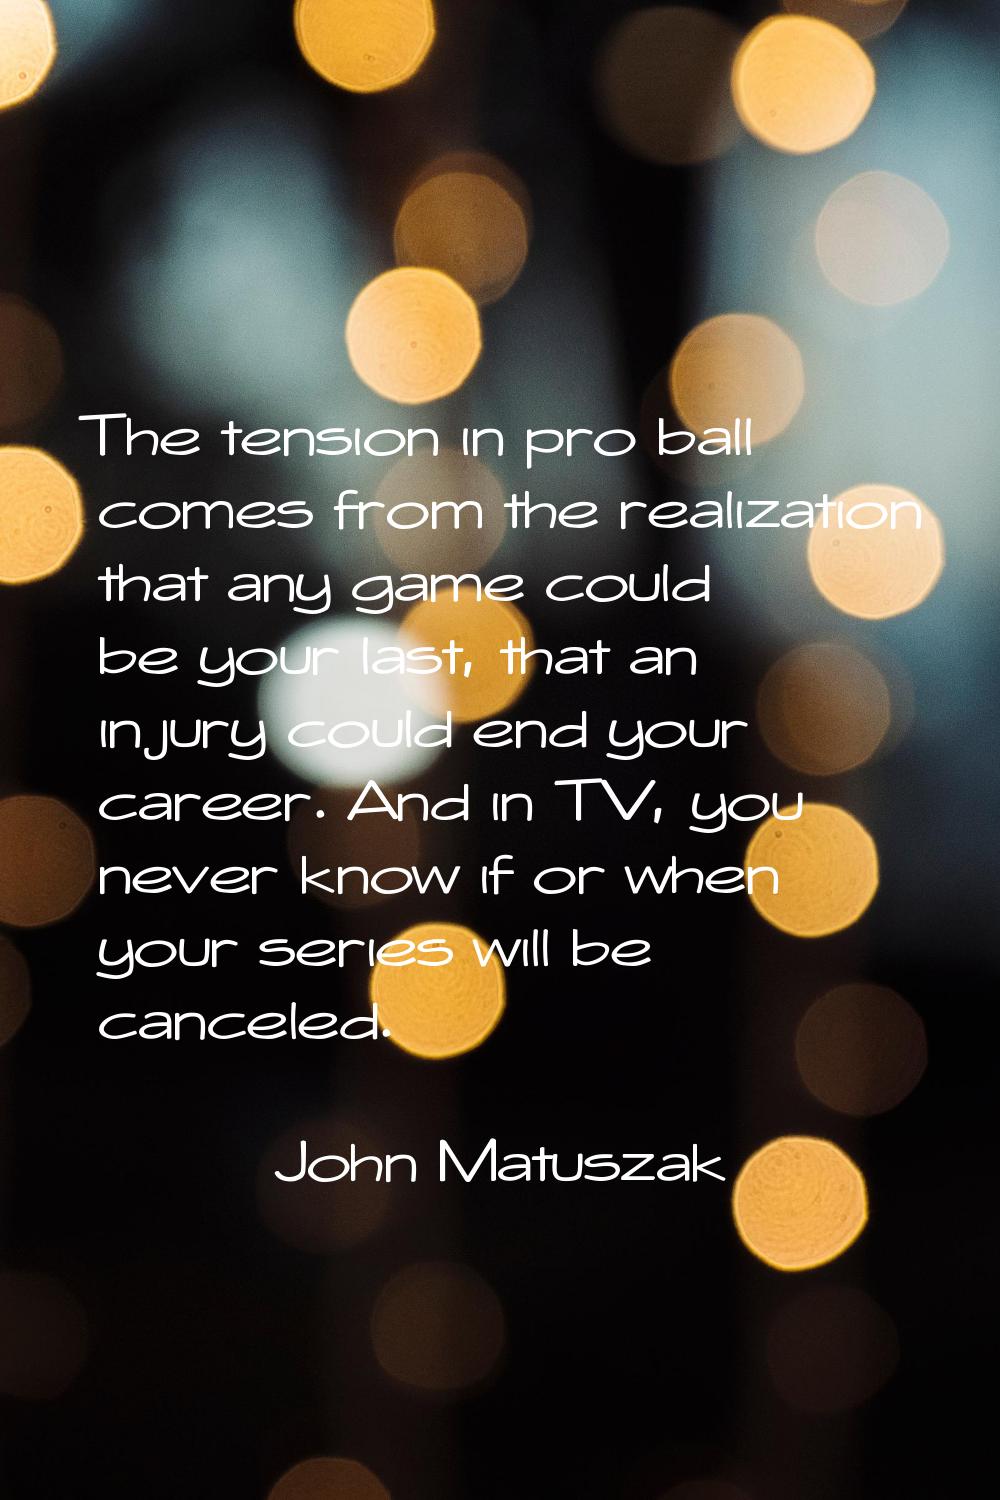 The tension in pro ball comes from the realization that any game could be your last, that an injury